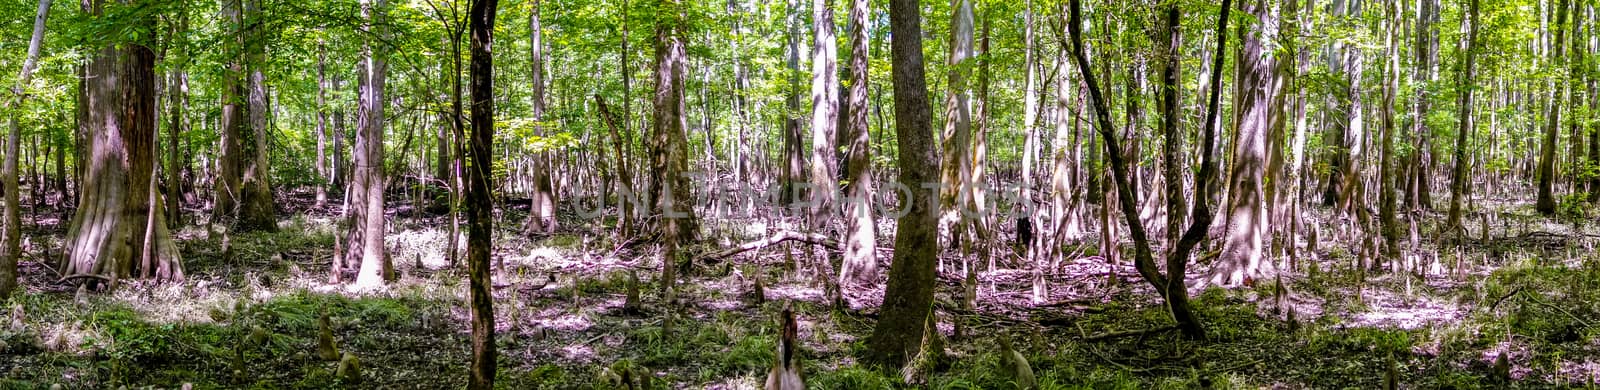 cypress forest and swamp of Congaree National Park in South Caro by digidreamgrafix